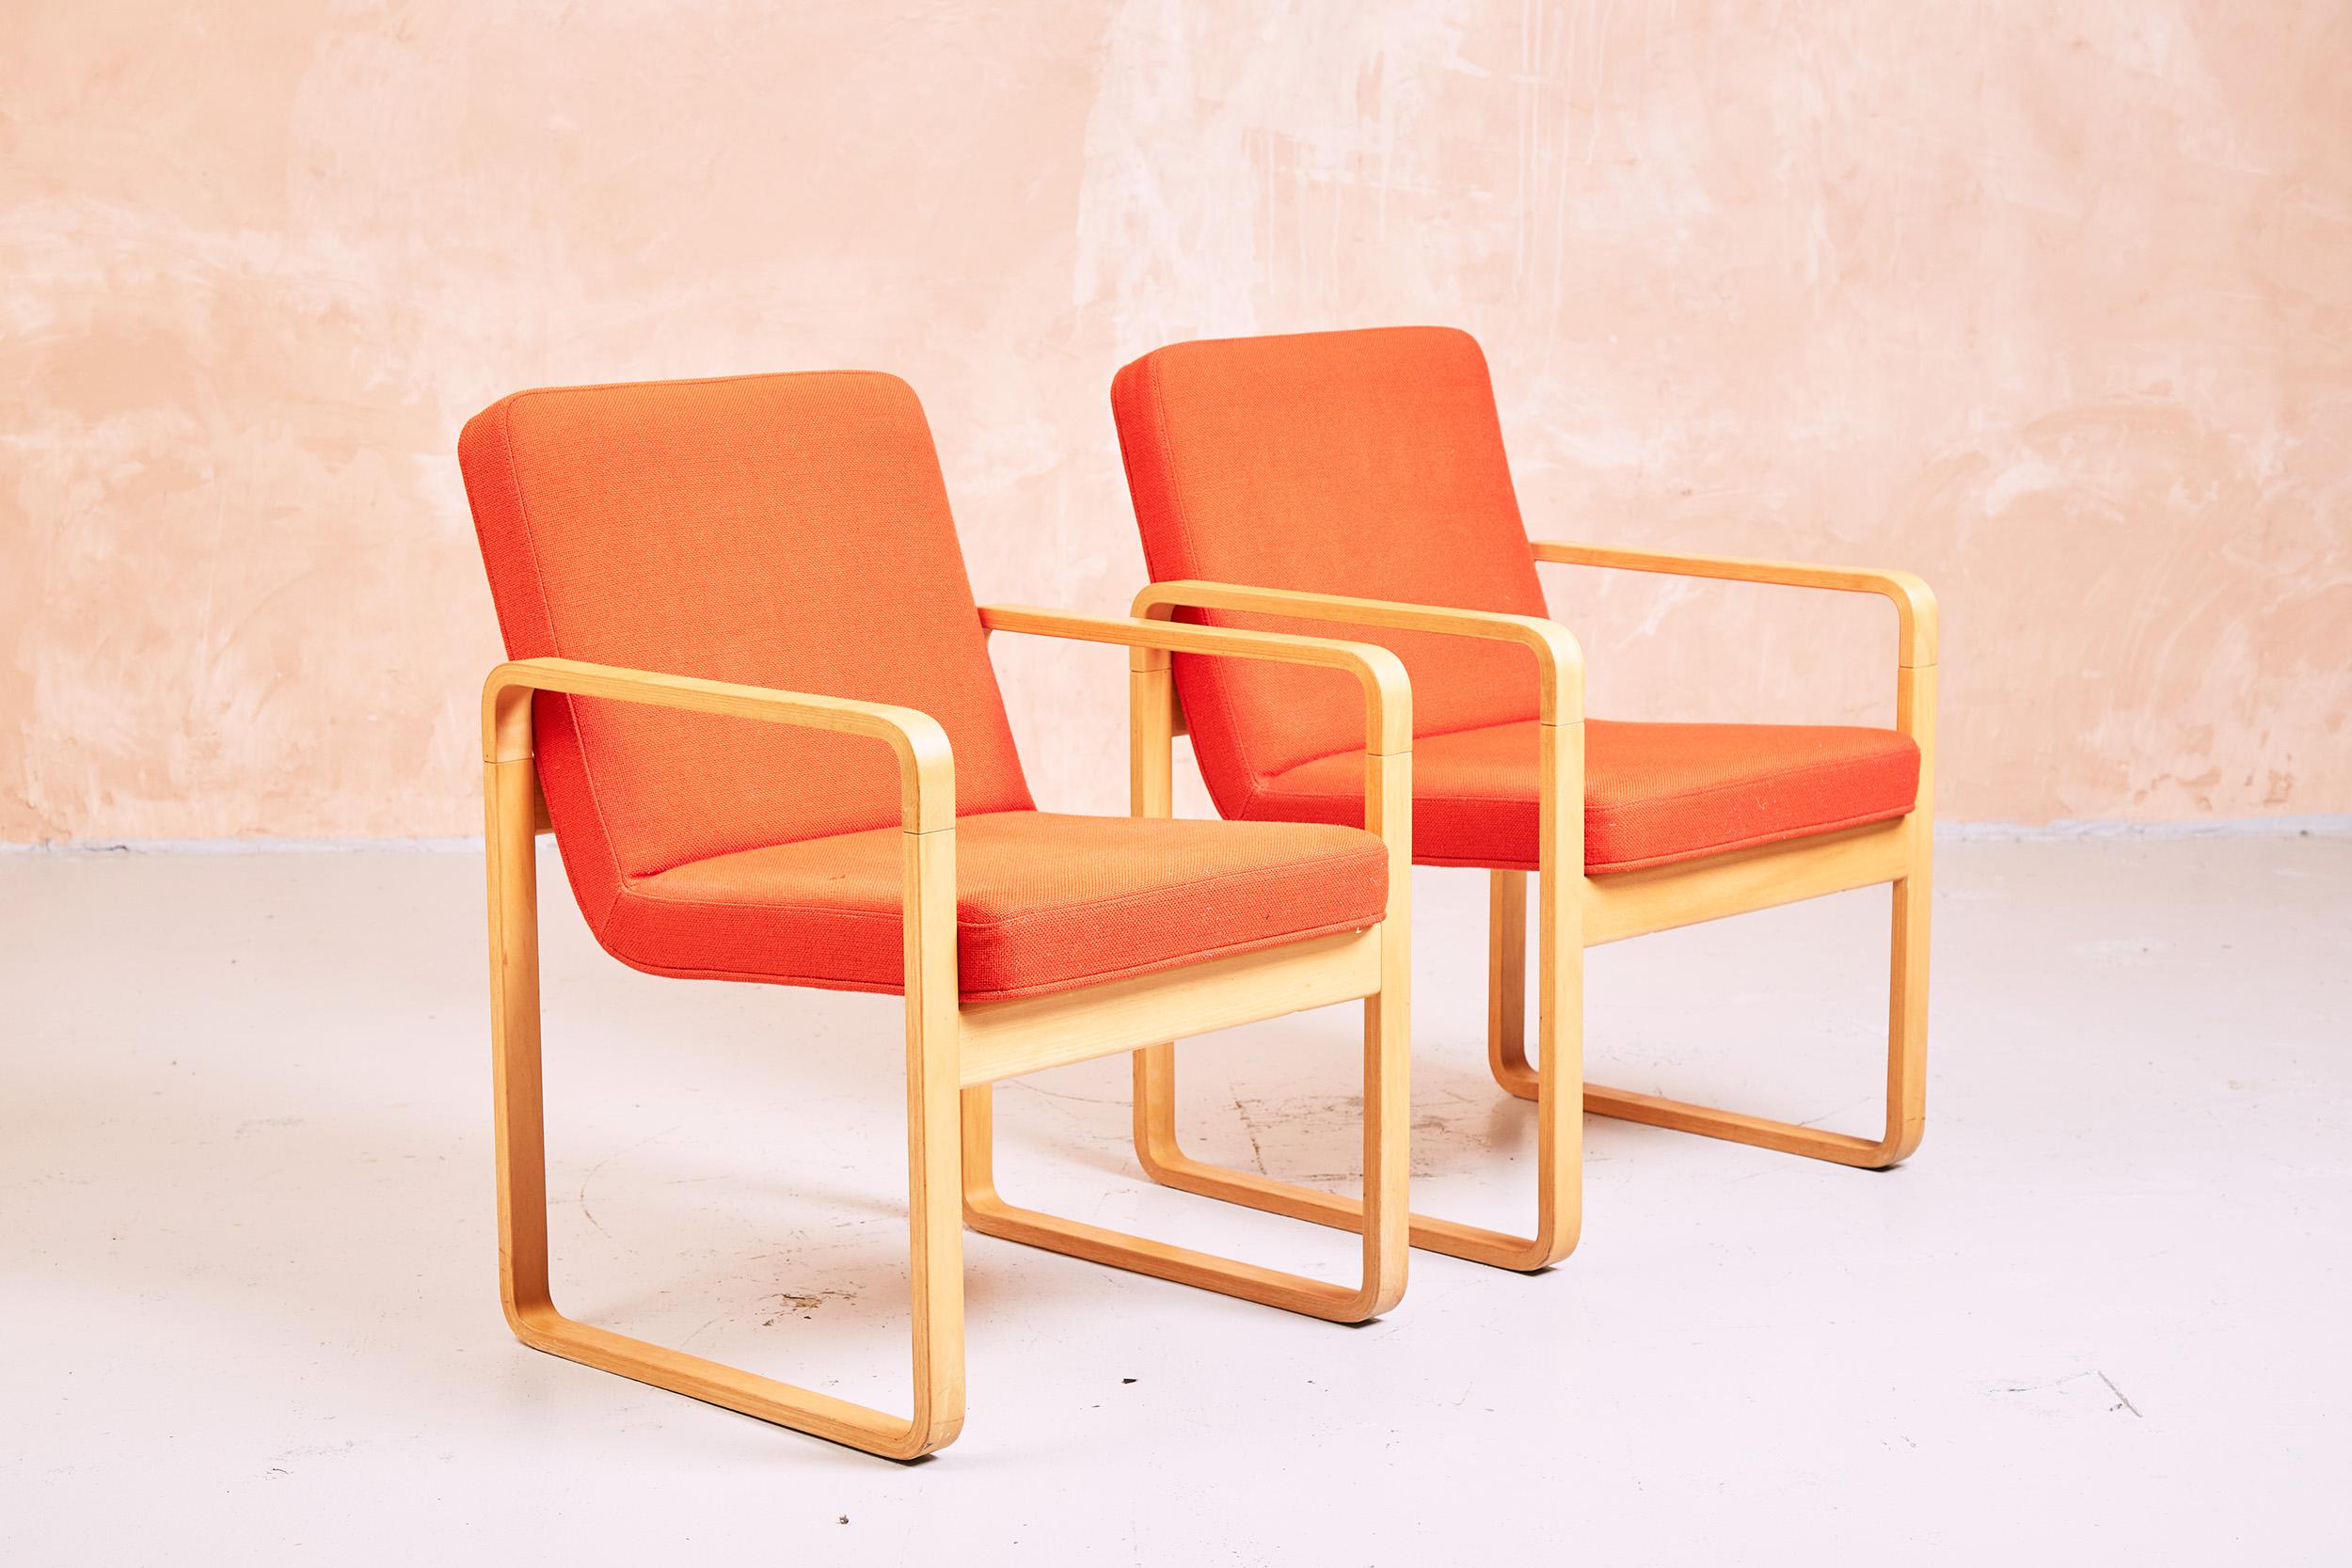 A pair of beech framed upholstered armchairs designed by Rud Thygesen & Johnny Sørensen for Magnus Olesen

Set of two armchairs from Thygesen and Sørensen‘s furniture collection. Designed in 1974-1975 these elegant but simple chairs can be used in